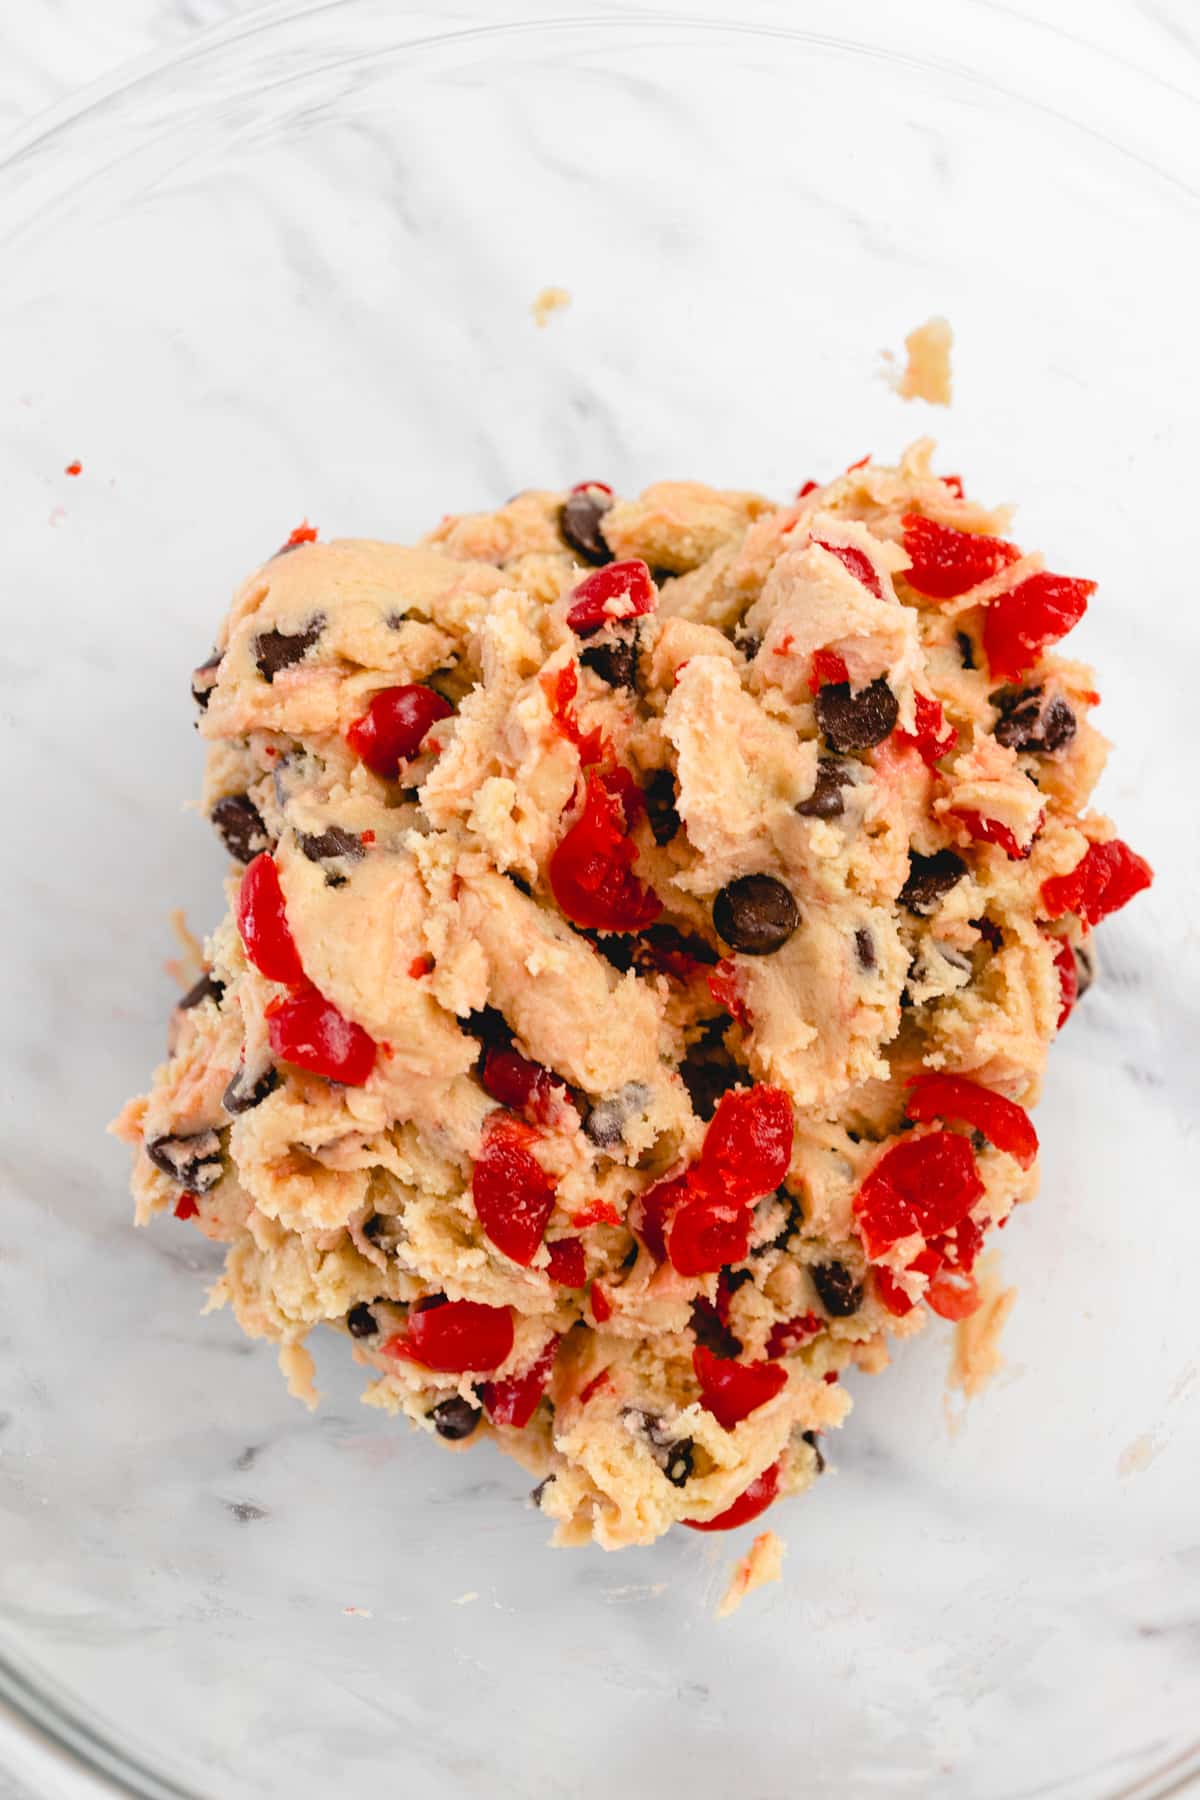 Top view close up of a glass mixing bowl with chocolate chip cherry cookie dough in it.